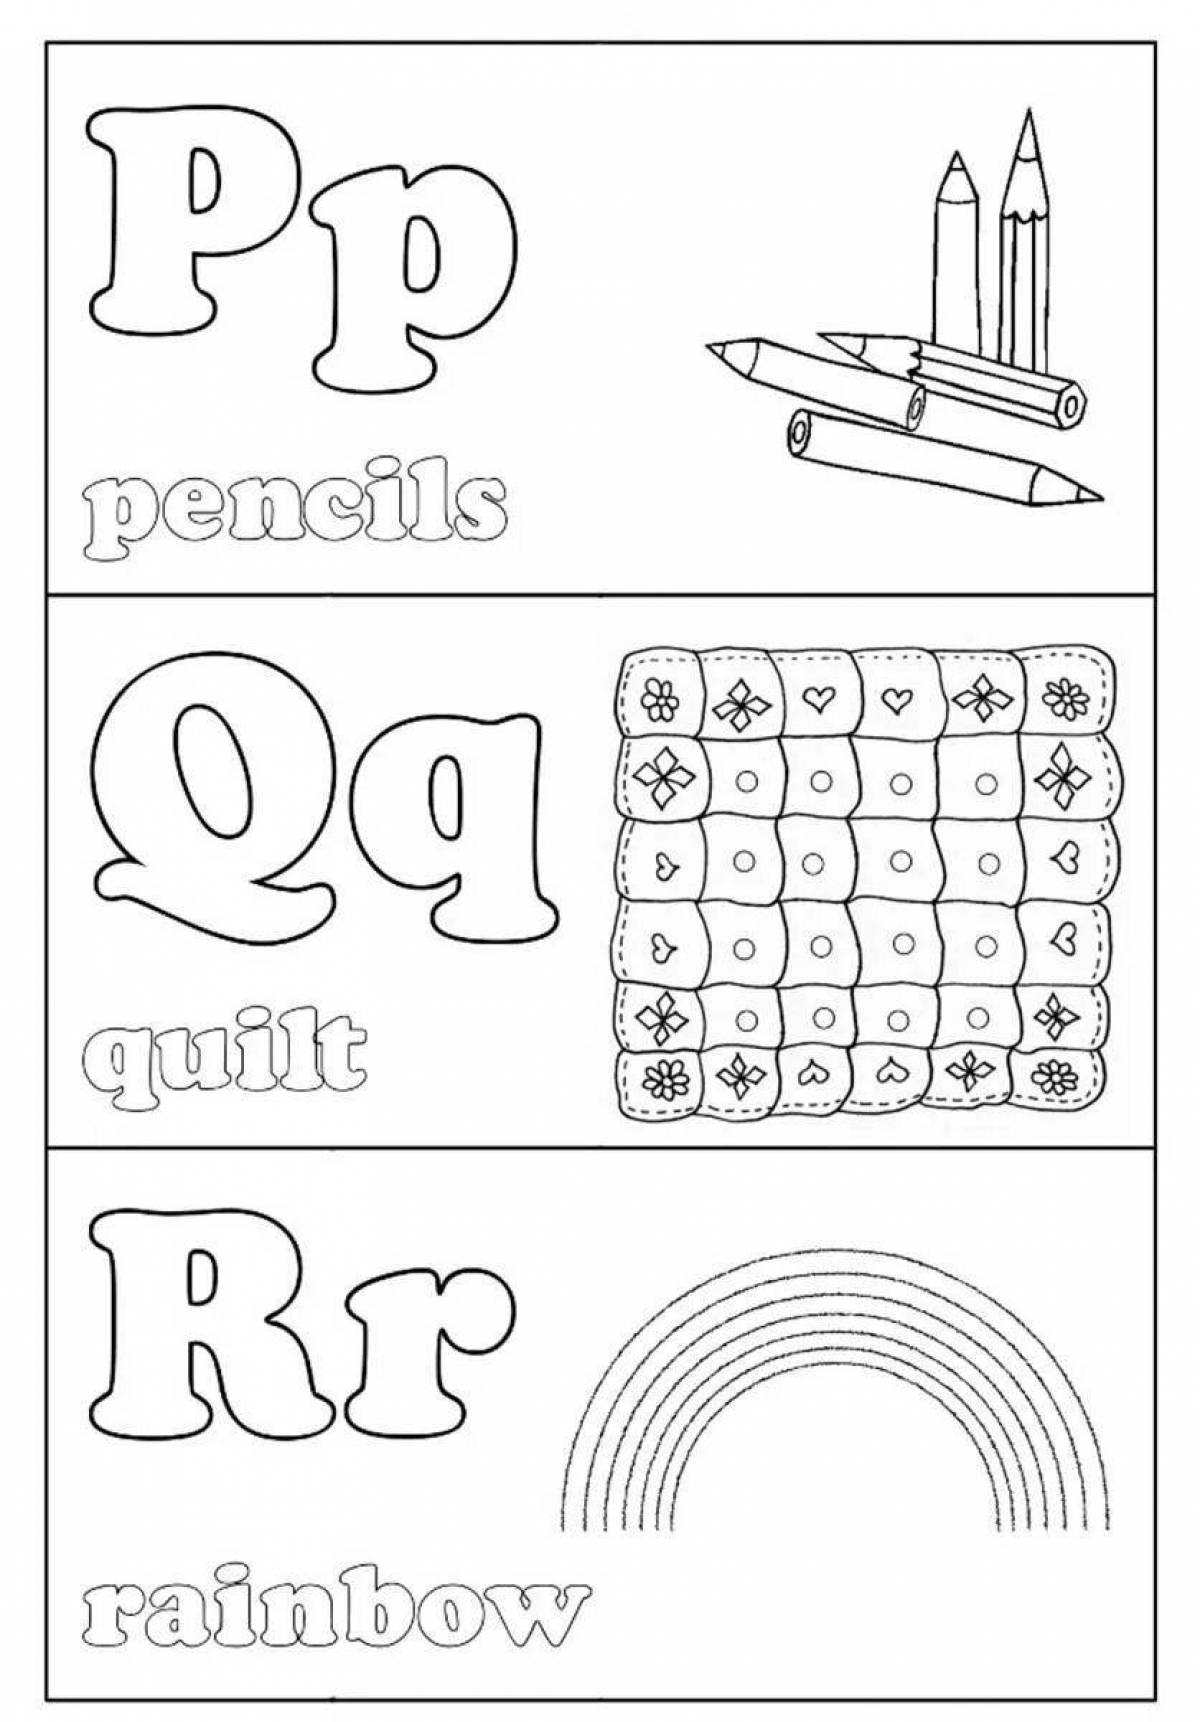 Colorful english letters coloring page for little learners